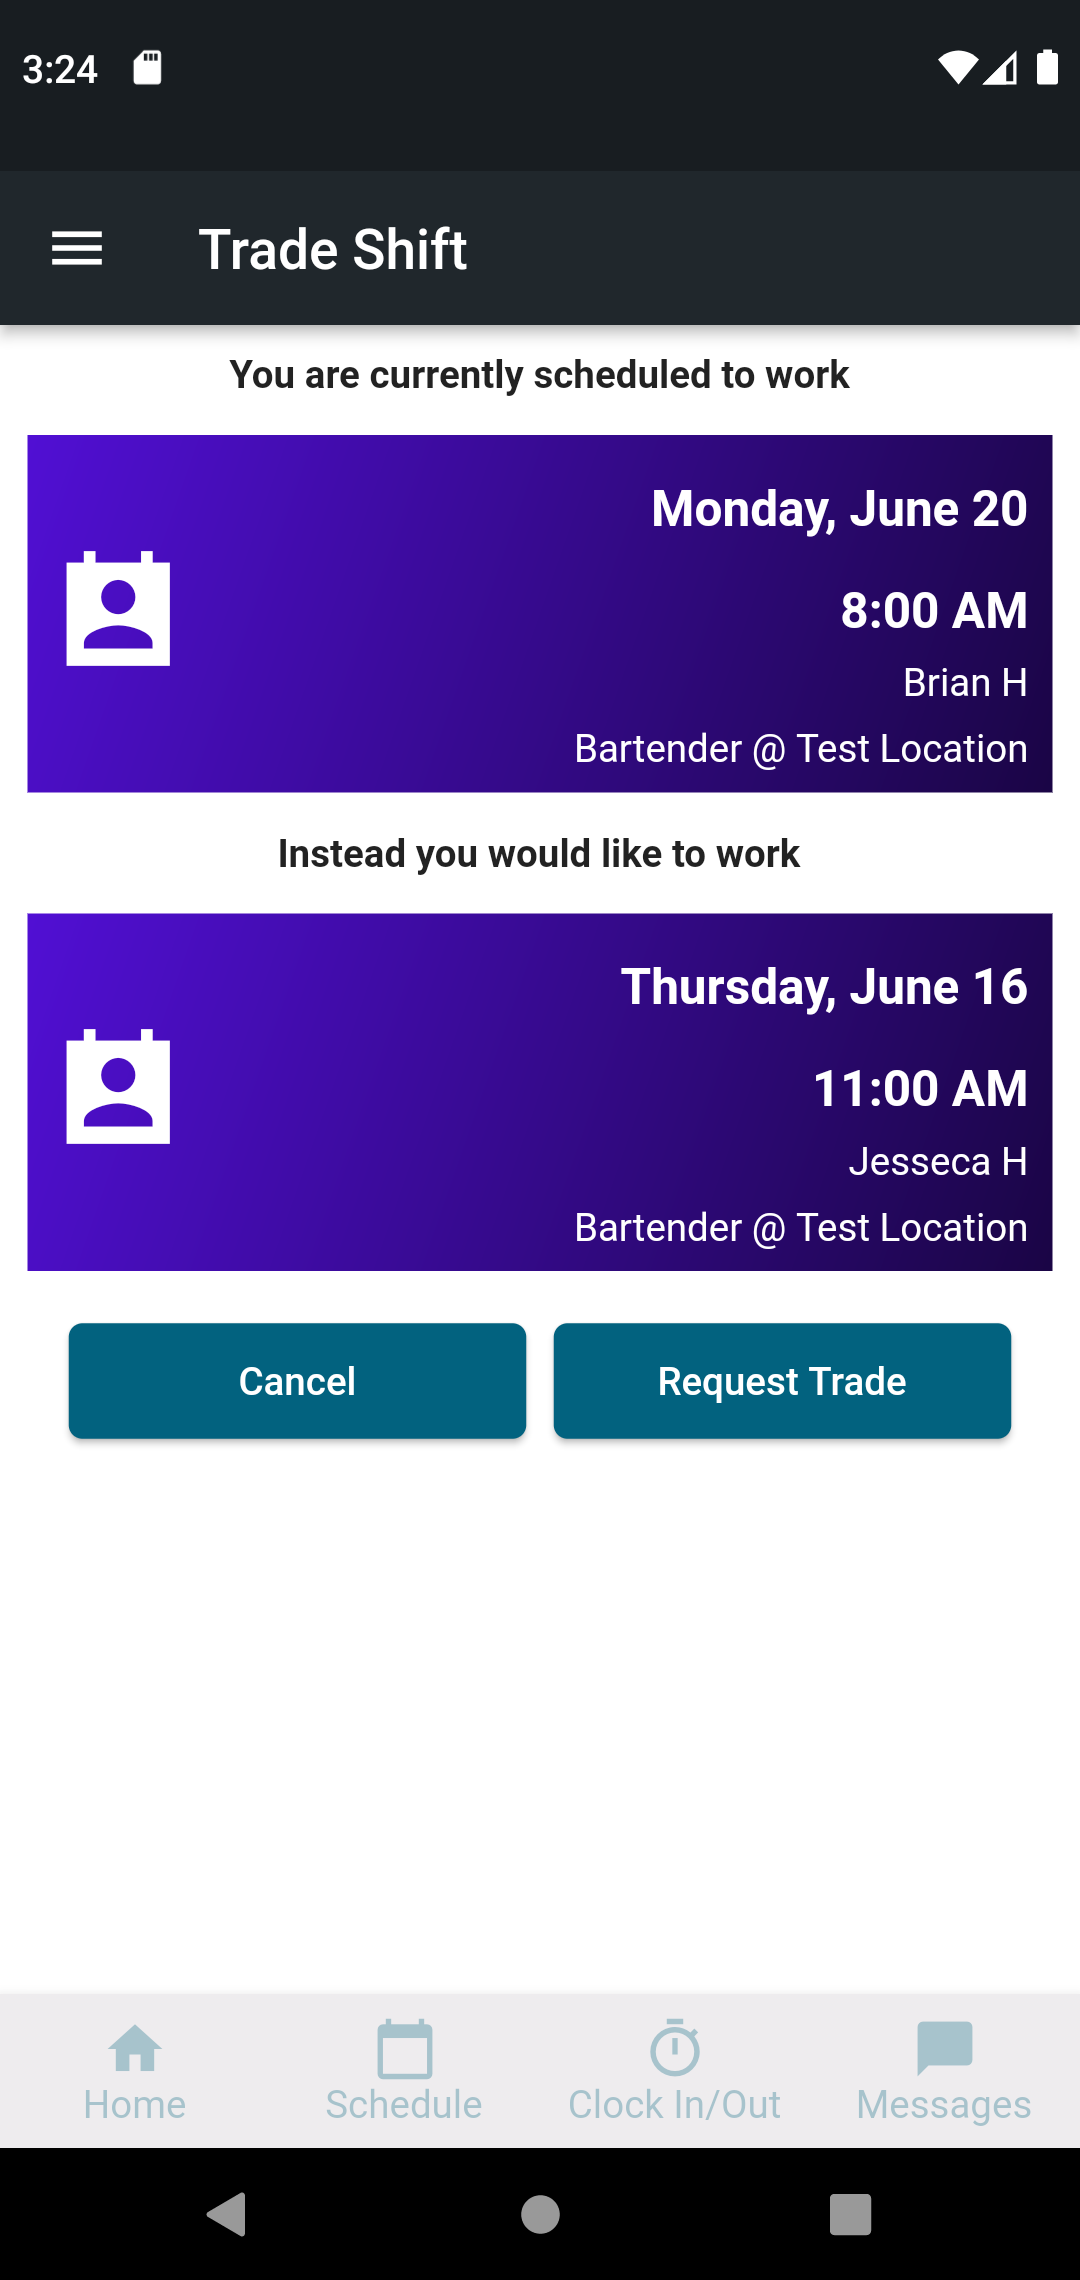 BarSight Scheduling - Shift Trade Approval